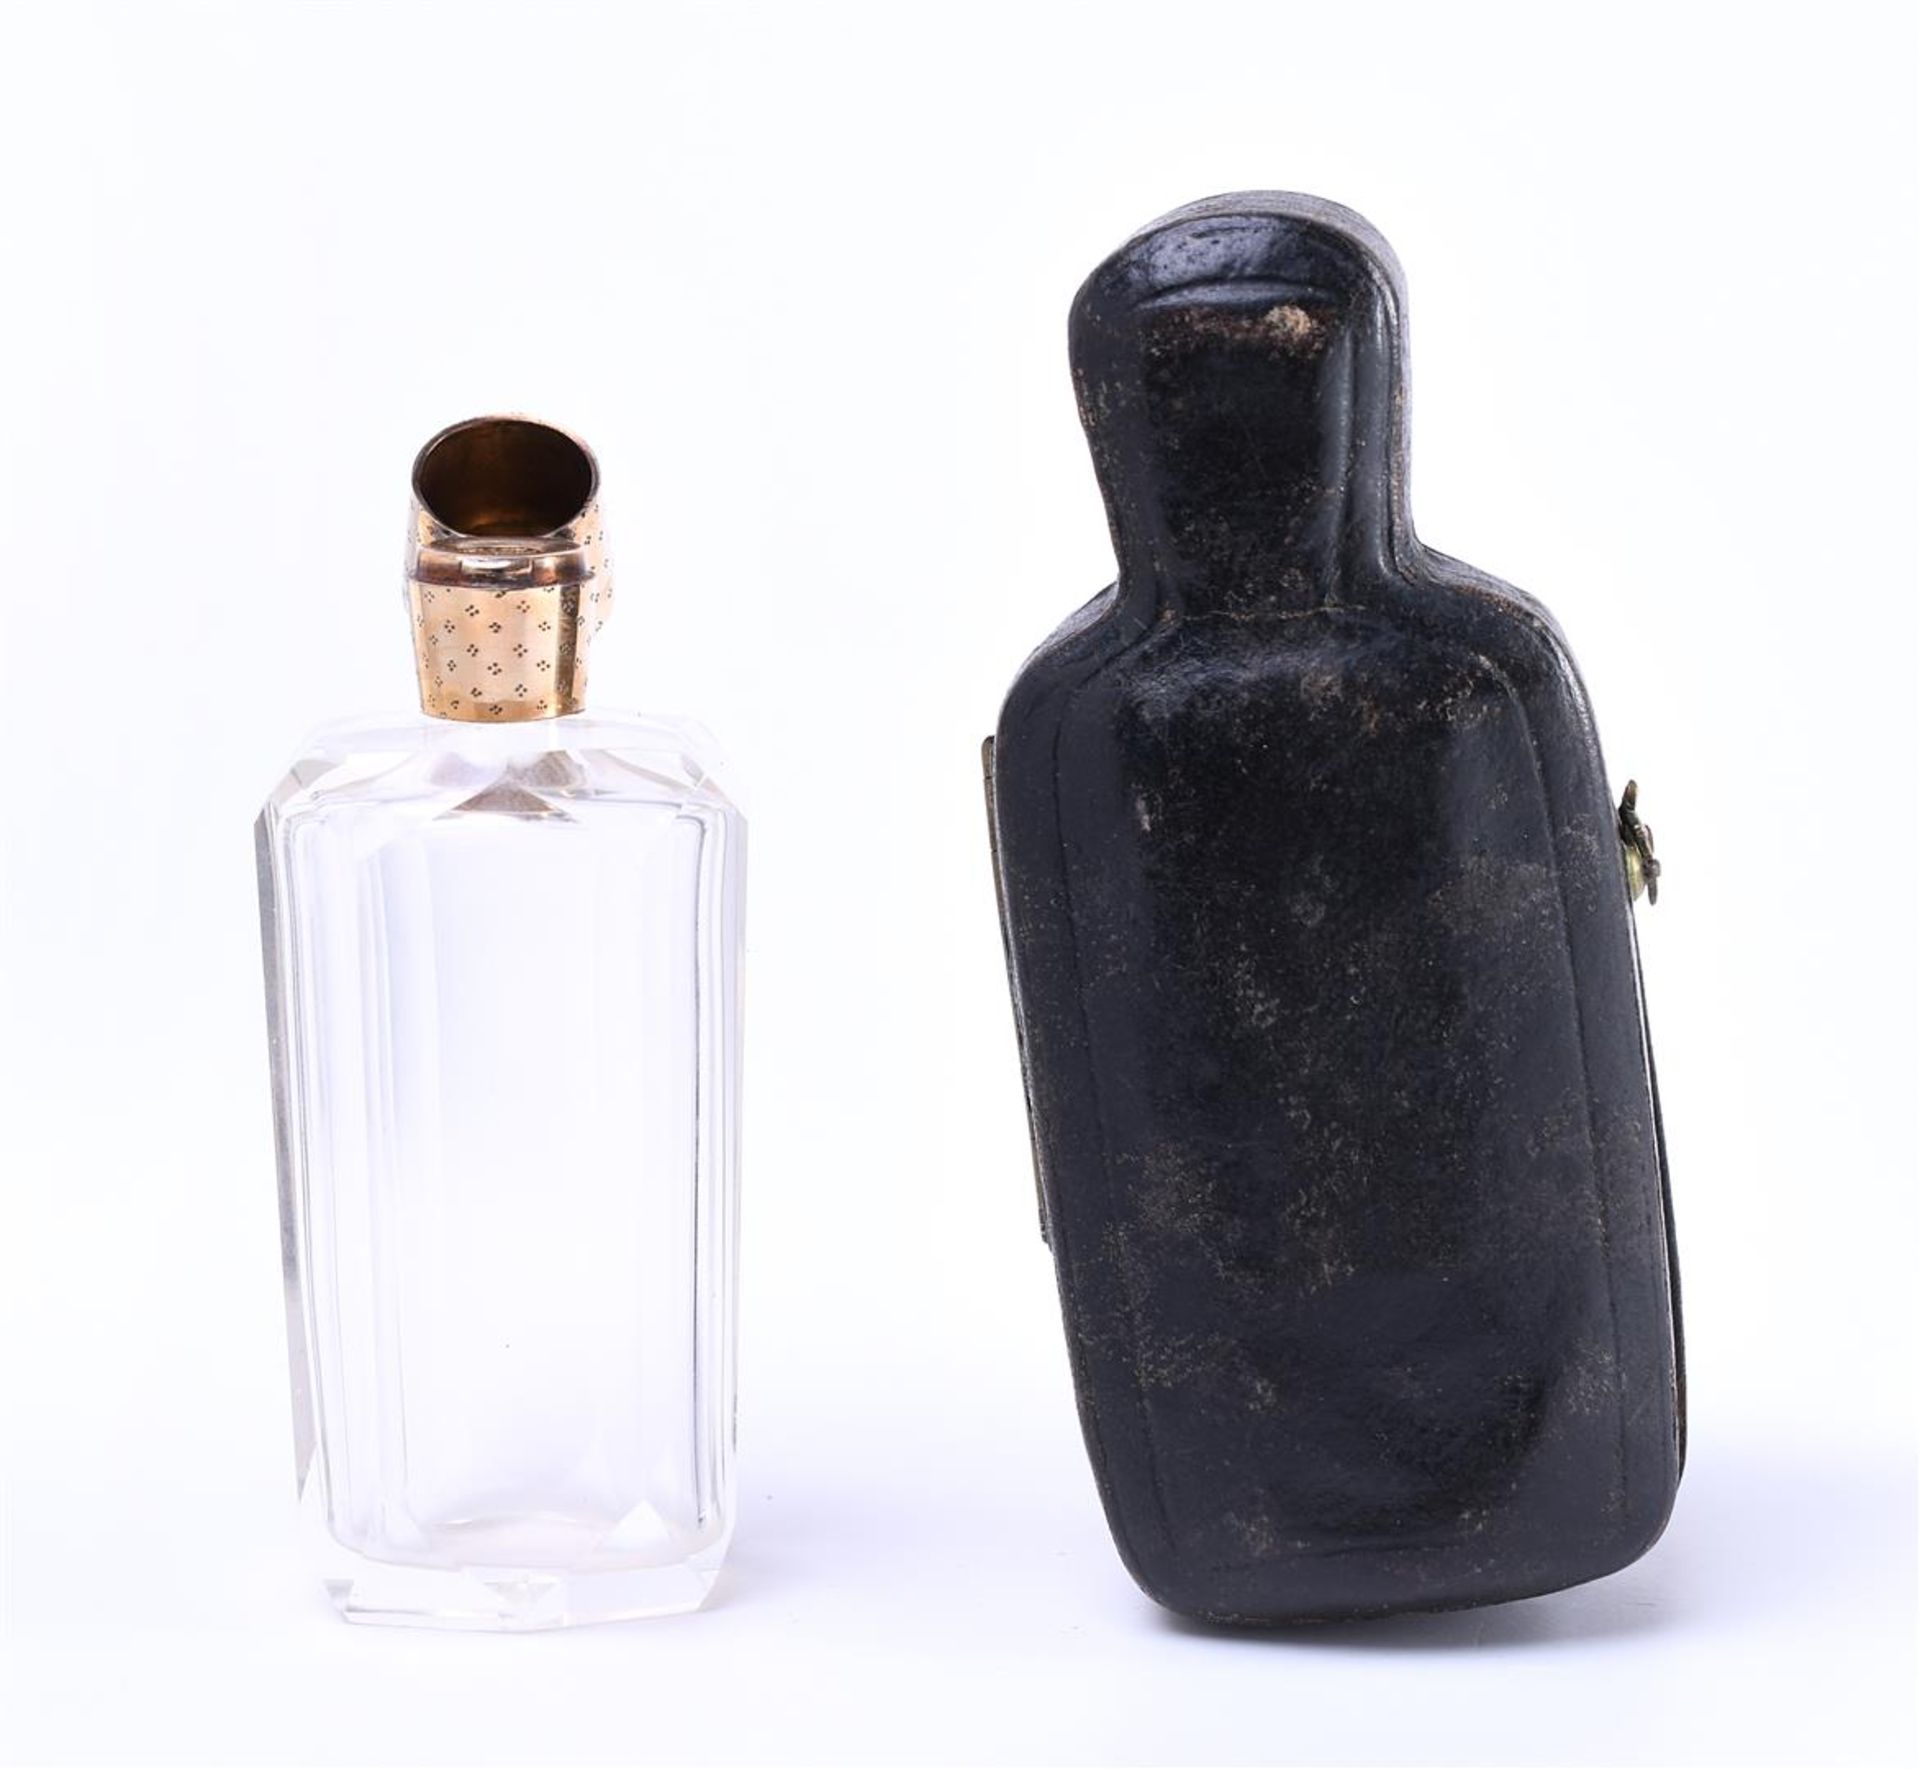 14 kt. Perfume bottle with travel case. Perfume bottle is made of glass and 14kt gold cap. Travel ca - Image 2 of 5